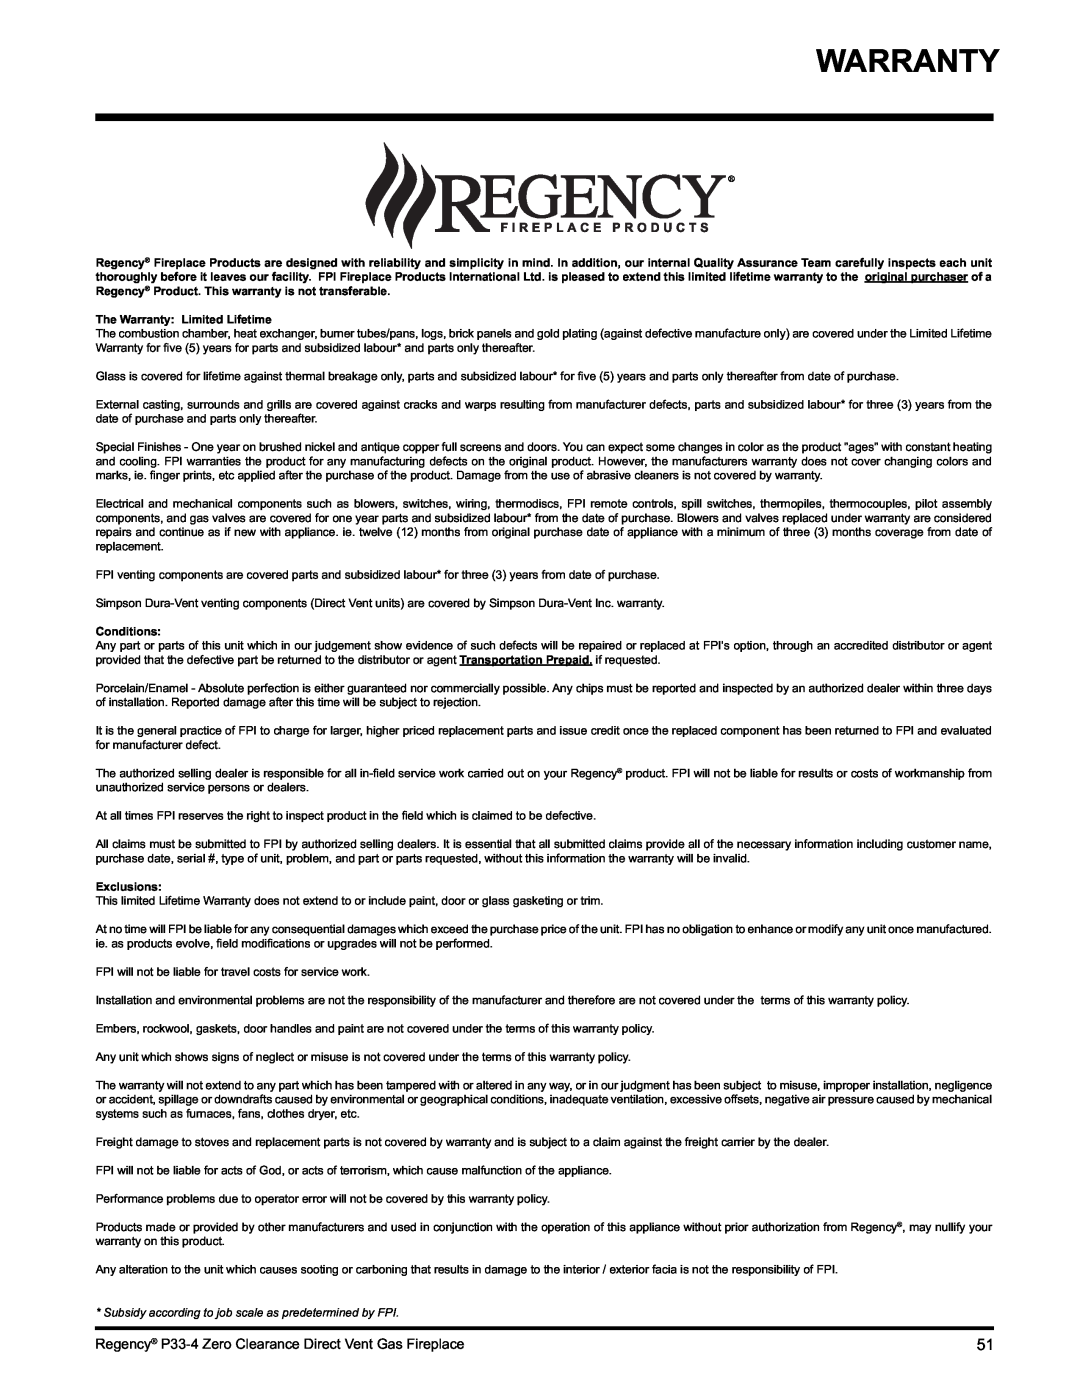 Regency P33-NG4 installation manual The Warranty Limited Lifetime, Conditions, Exclusions 